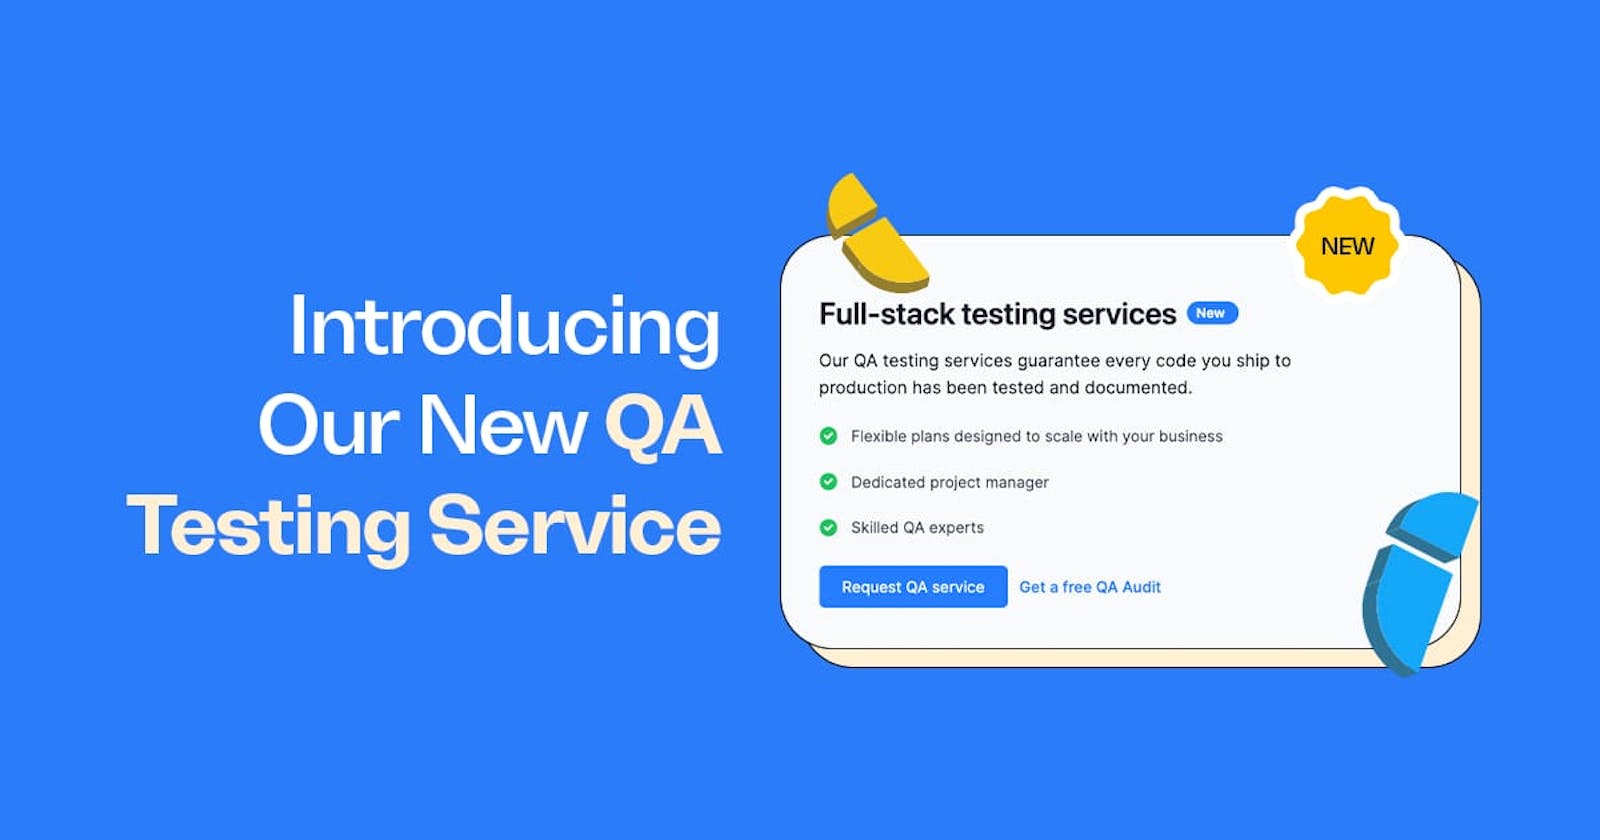 Introducing Our New QA Testing Service